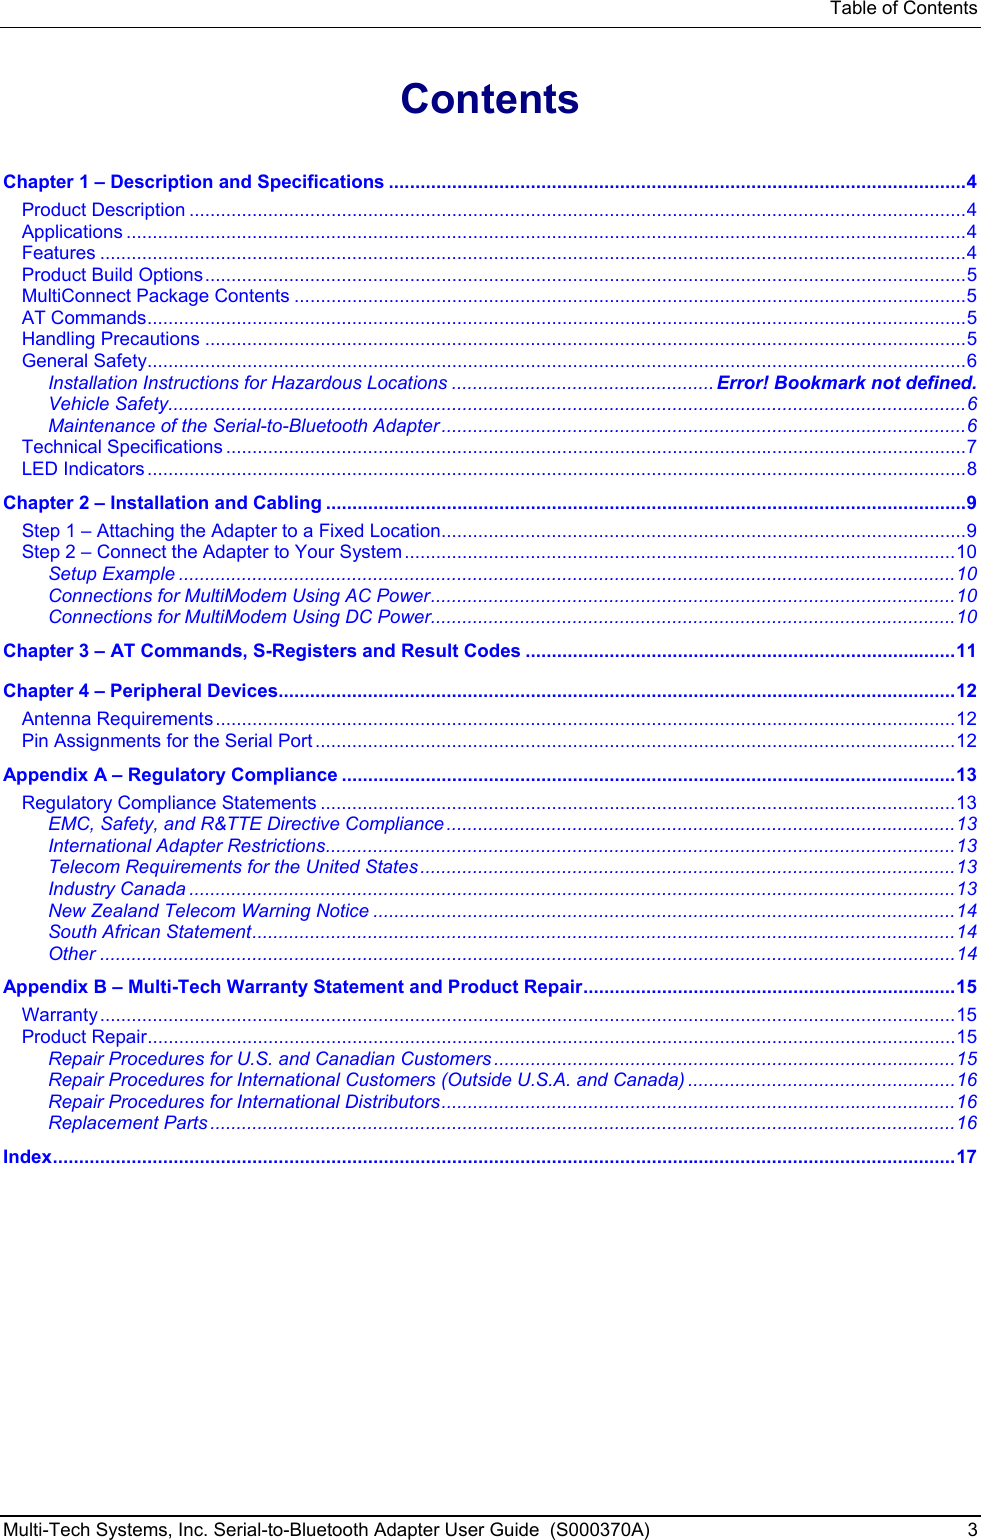 Table of Contents Multi-Tech Systems, Inc. Serial-to-Bluetooth Adapter User Guide  (S000370A)  3  Contents  Chapter 1 – Description and Specifications ..............................................................................................................4 Product Description ....................................................................................................................................................4 Applications ................................................................................................................................................................4 Features .....................................................................................................................................................................4 Product Build Options.................................................................................................................................................5 MultiConnect Package Contents ................................................................................................................................5 AT Commands............................................................................................................................................................5 Handling Precautions .................................................................................................................................................5 General Safety............................................................................................................................................................6 Installation Instructions for Hazardous Locations .................................................. Error! Bookmark not defined. Vehicle Safety........................................................................................................................................................6 Maintenance of the Serial-to-Bluetooth Adapter ....................................................................................................6 Technical Specifications .............................................................................................................................................7 LED Indicators ............................................................................................................................................................8 Chapter 2 – Installation and Cabling ..........................................................................................................................9 Step 1 – Attaching the Adapter to a Fixed Location....................................................................................................9 Step 2 – Connect the Adapter to Your System.........................................................................................................10 Setup Example ....................................................................................................................................................10 Connections for MultiModem Using AC Power....................................................................................................10 Connections for MultiModem Using DC Power....................................................................................................10 Chapter 3 – AT Commands, S-Registers and Result Codes ..................................................................................11 Chapter 4 – Peripheral Devices.................................................................................................................................12 Antenna Requirements.............................................................................................................................................12 Pin Assignments for the Serial Port ..........................................................................................................................12 Appendix A – Regulatory Compliance .....................................................................................................................13 Regulatory Compliance Statements .........................................................................................................................13 EMC, Safety, and R&amp;TTE Directive Compliance.................................................................................................13 International Adapter Restrictions........................................................................................................................13 Telecom Requirements for the United States......................................................................................................13 Industry Canada ..................................................................................................................................................13 New Zealand Telecom Warning Notice ...............................................................................................................14 South African Statement......................................................................................................................................14 Other ...................................................................................................................................................................14 Appendix B – Multi-Tech Warranty Statement and Product Repair.......................................................................15 Warranty...................................................................................................................................................................15 Product Repair..........................................................................................................................................................15 Repair Procedures for U.S. and Canadian Customers ........................................................................................15 Repair Procedures for International Customers (Outside U.S.A. and Canada) ...................................................16 Repair Procedures for International Distributors..................................................................................................16 Replacement Parts ..............................................................................................................................................16 Index............................................................................................................................................................................17 